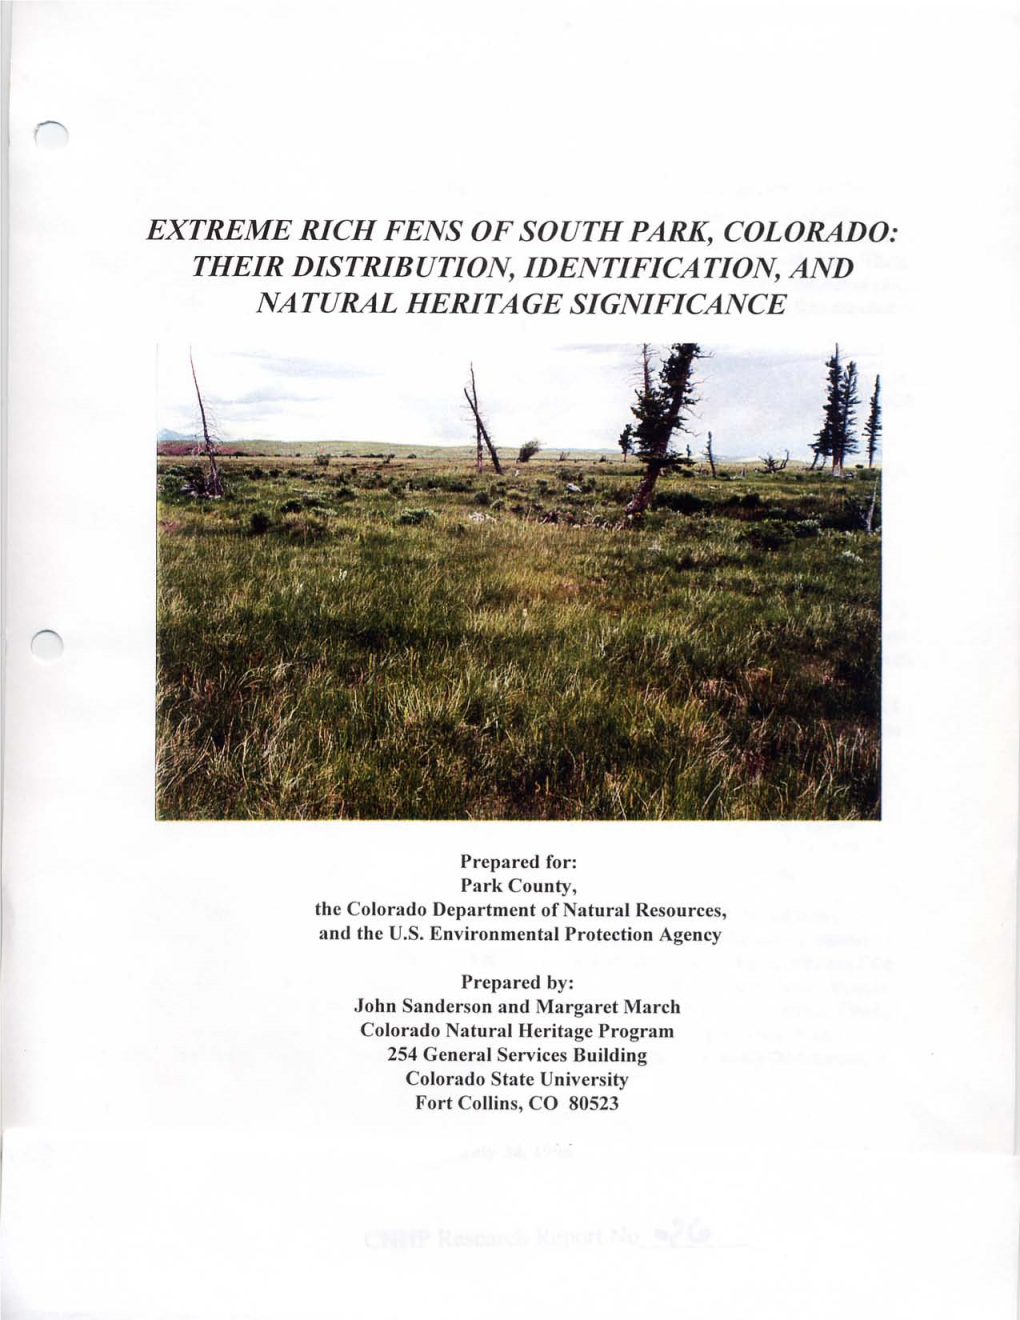 Extreme Rich Fens of South Park, Colorado: Their Distribution, Identification, and Natural Heritage Significance